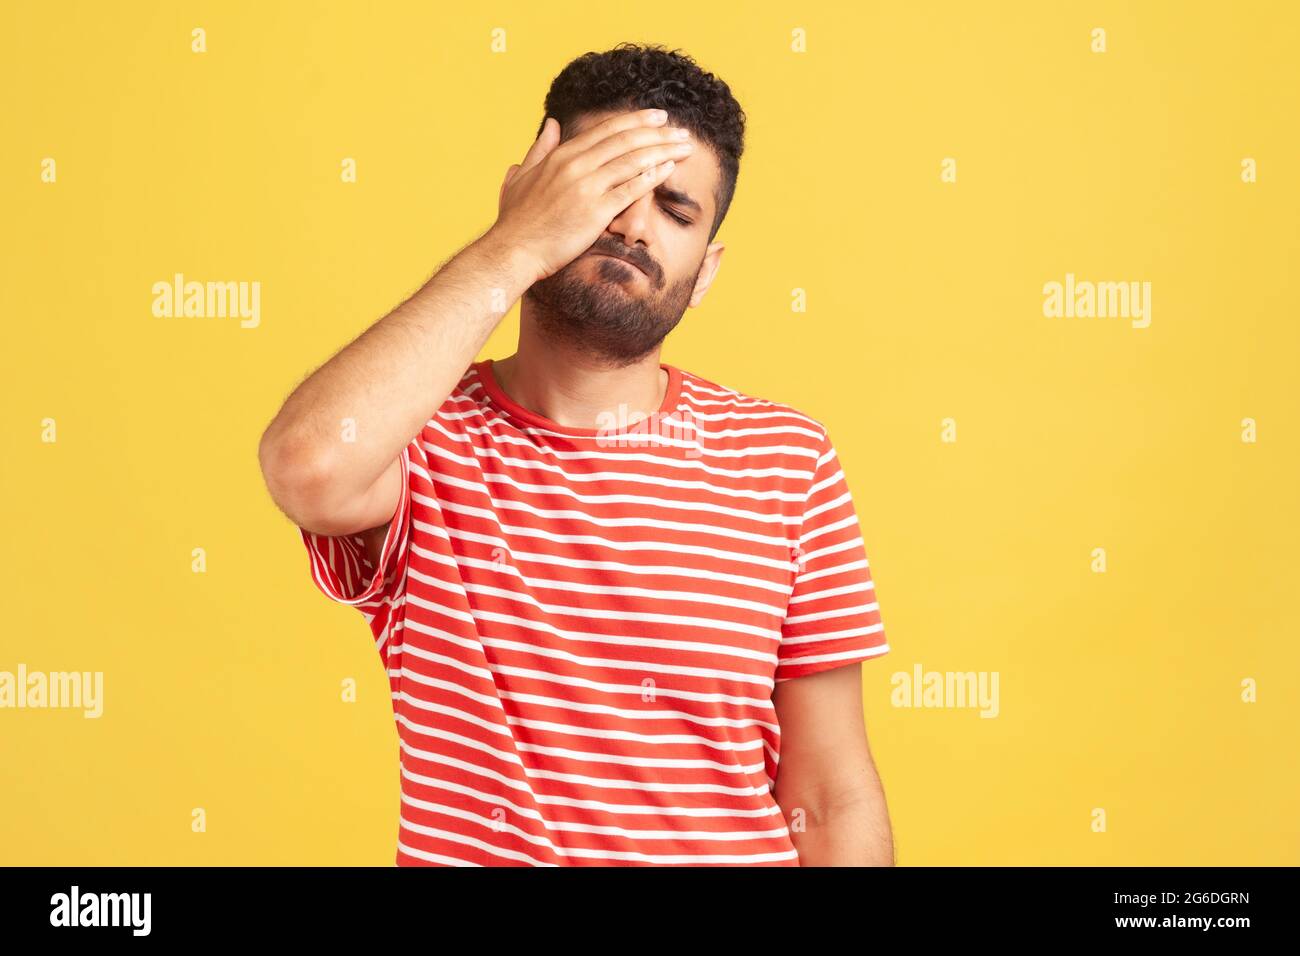 Unhappy forgetful man with beard in striped t-shirt making facepalm gesture keeping hand on head, blaming himself for bad memory, unforgivable mistake Stock Photo